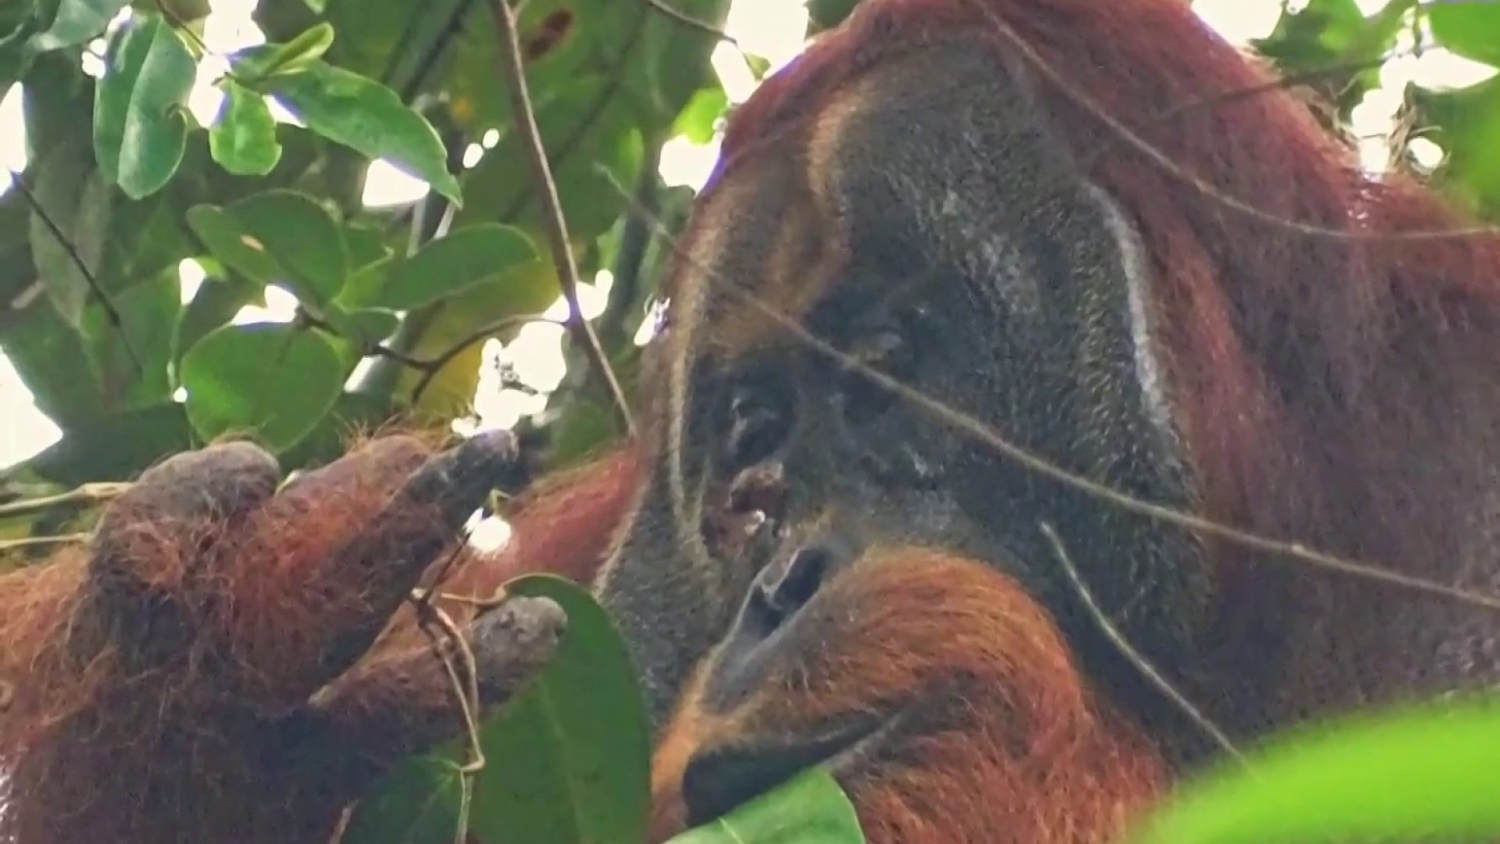 Orangutan believed to be first animal seen using medicinal plant as  treatment